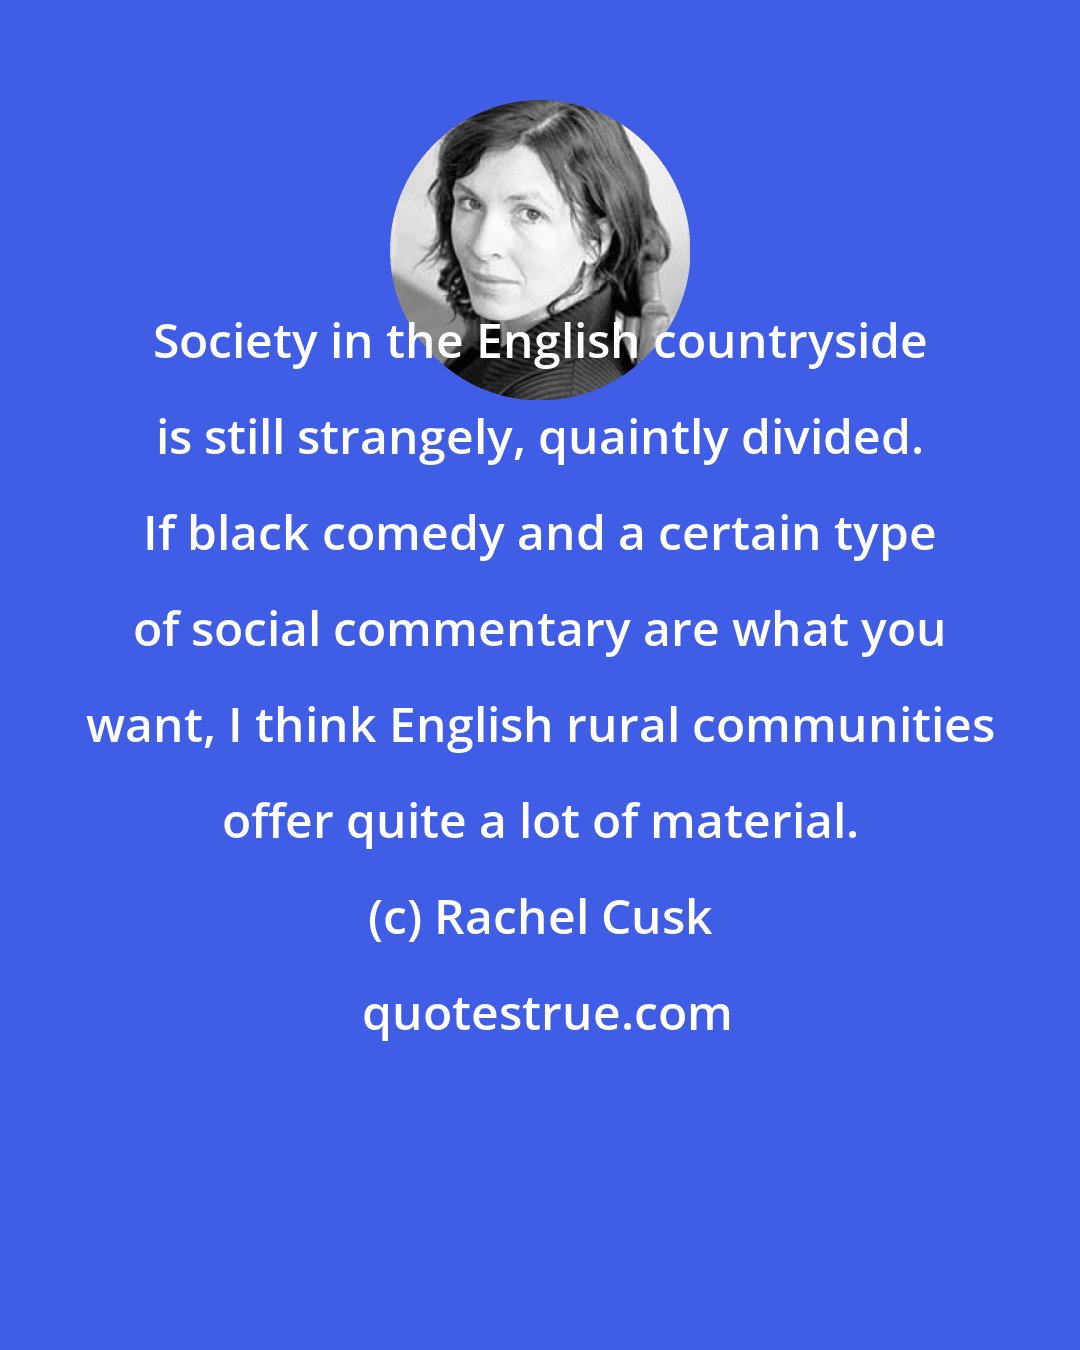 Rachel Cusk: Society in the English countryside is still strangely, quaintly divided. If black comedy and a certain type of social commentary are what you want, I think English rural communities offer quite a lot of material.